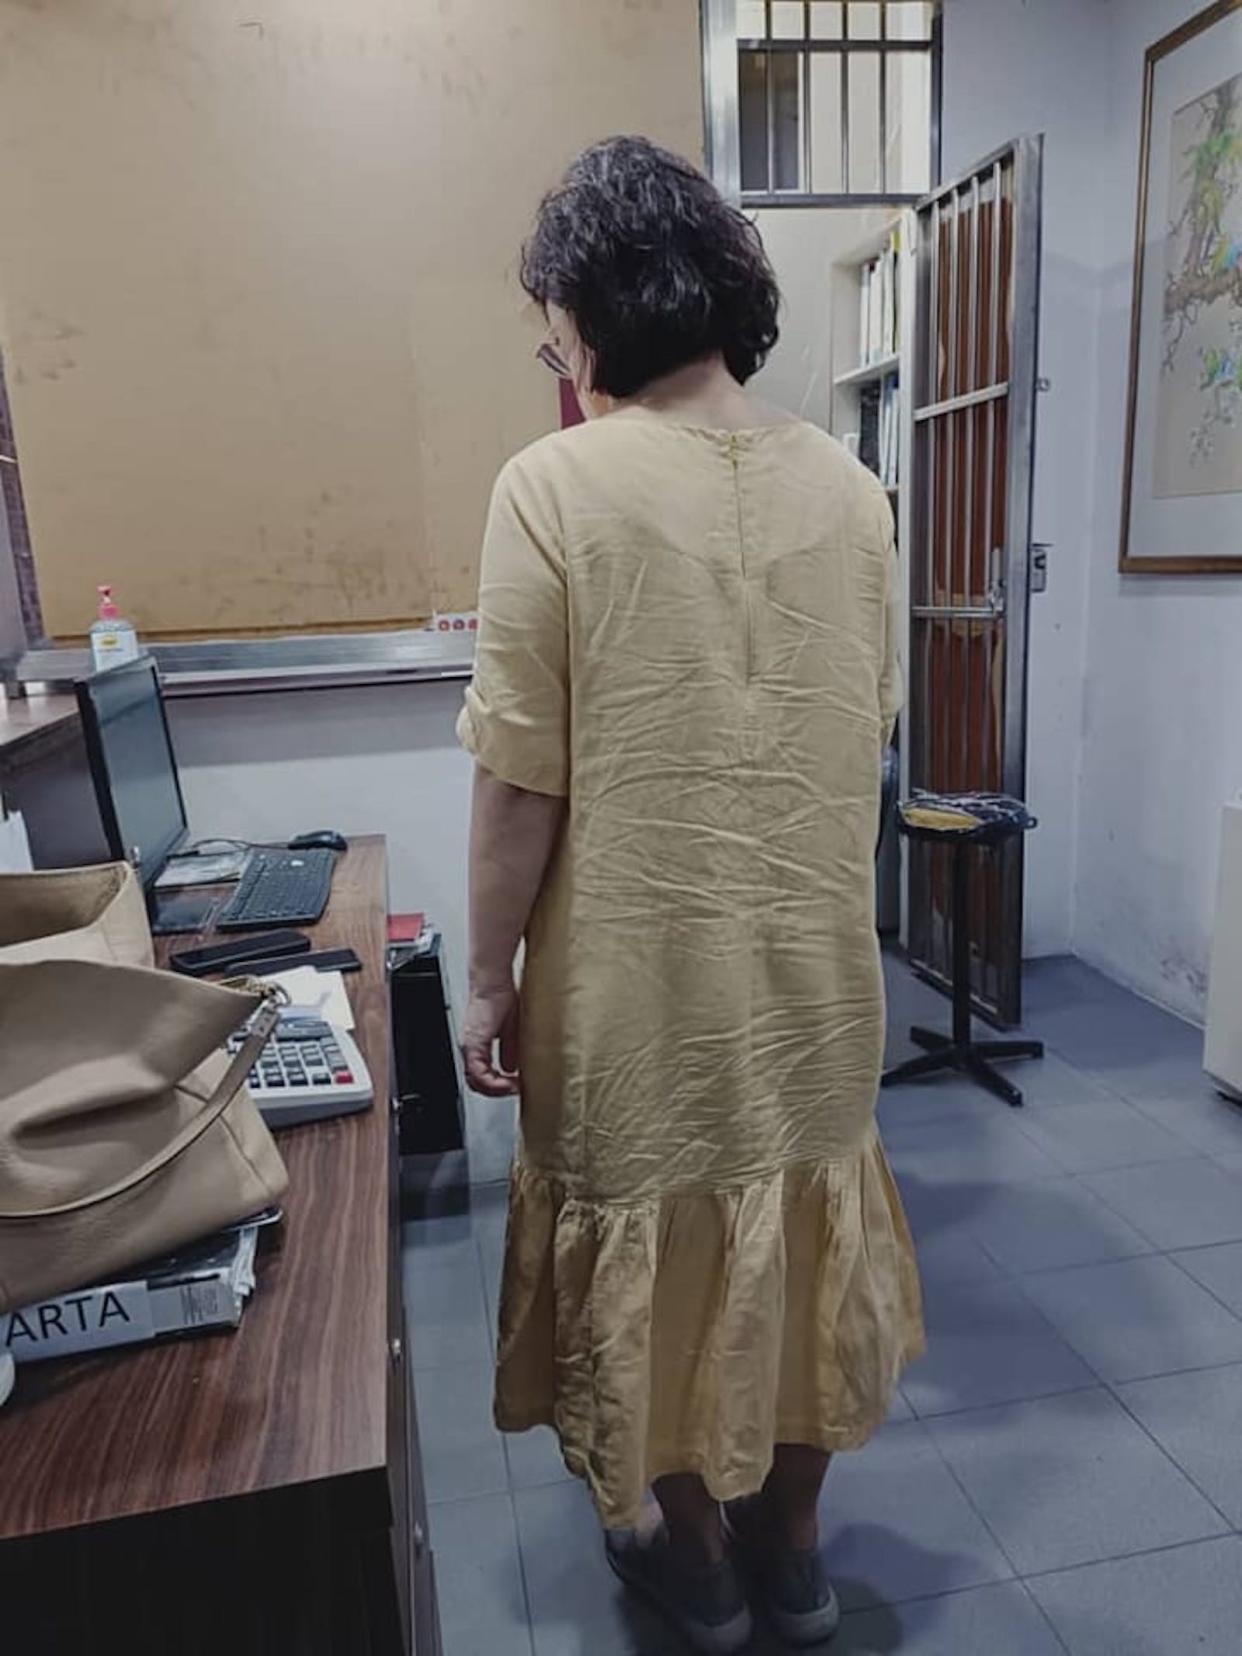 A 60-year-old woman was denied from using the elevator to renew her business permit after entering the premises because the security guard claimed that her attire was ‘inappropriate’.